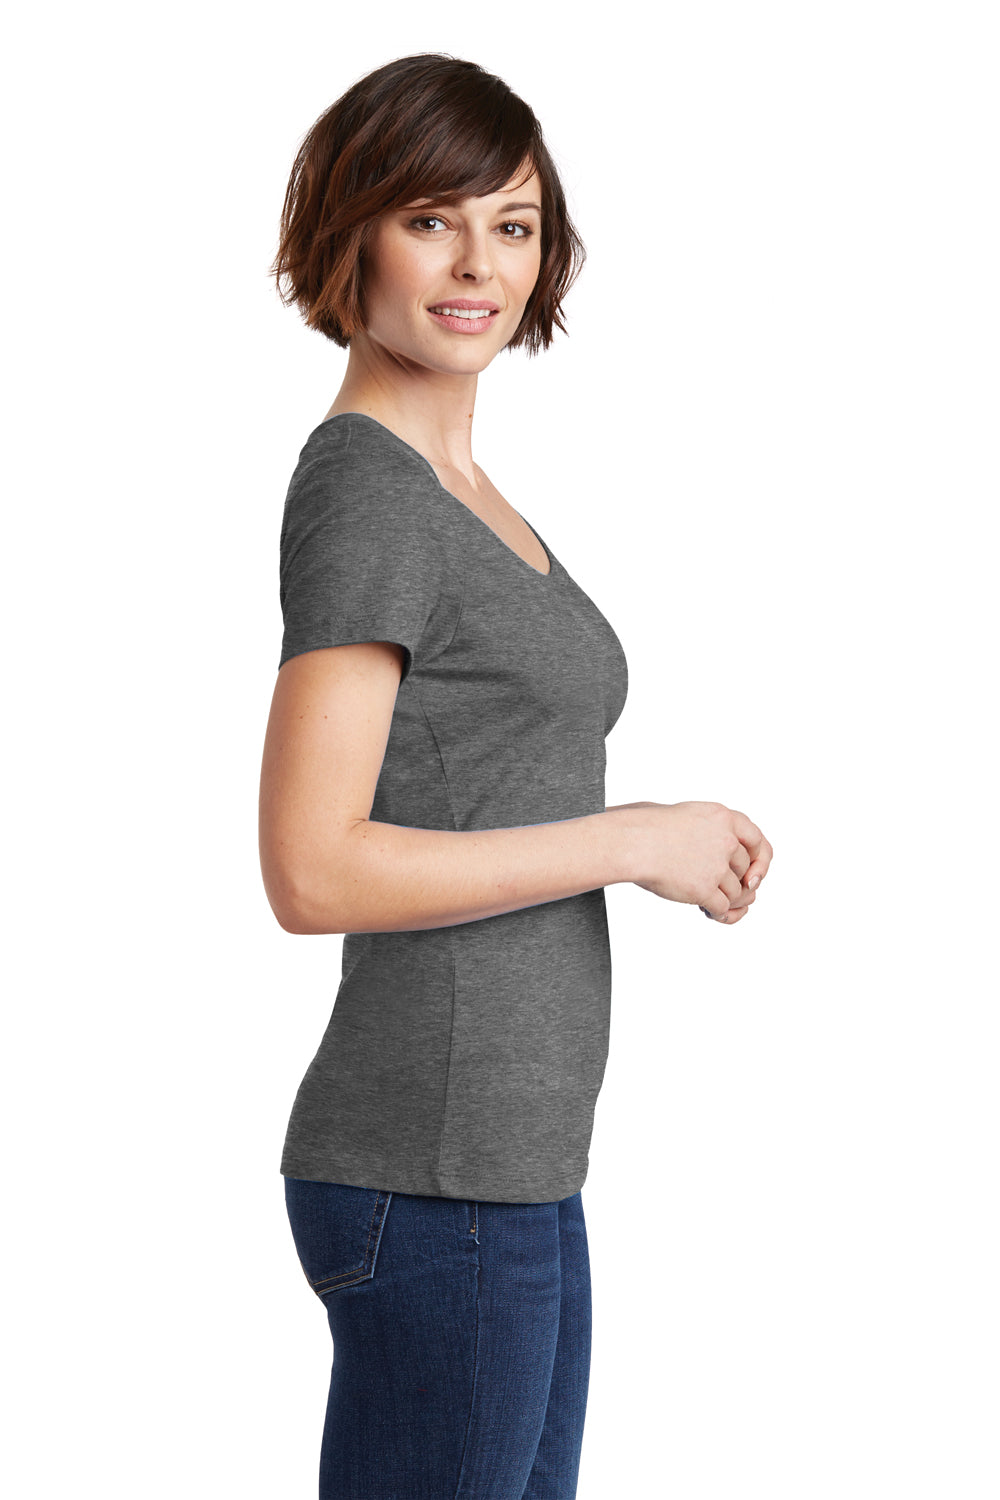 District DM106L Womens Perfect Weight Short Sleeve Scoop Neck T-Shirt Heather Nickel Grey Side